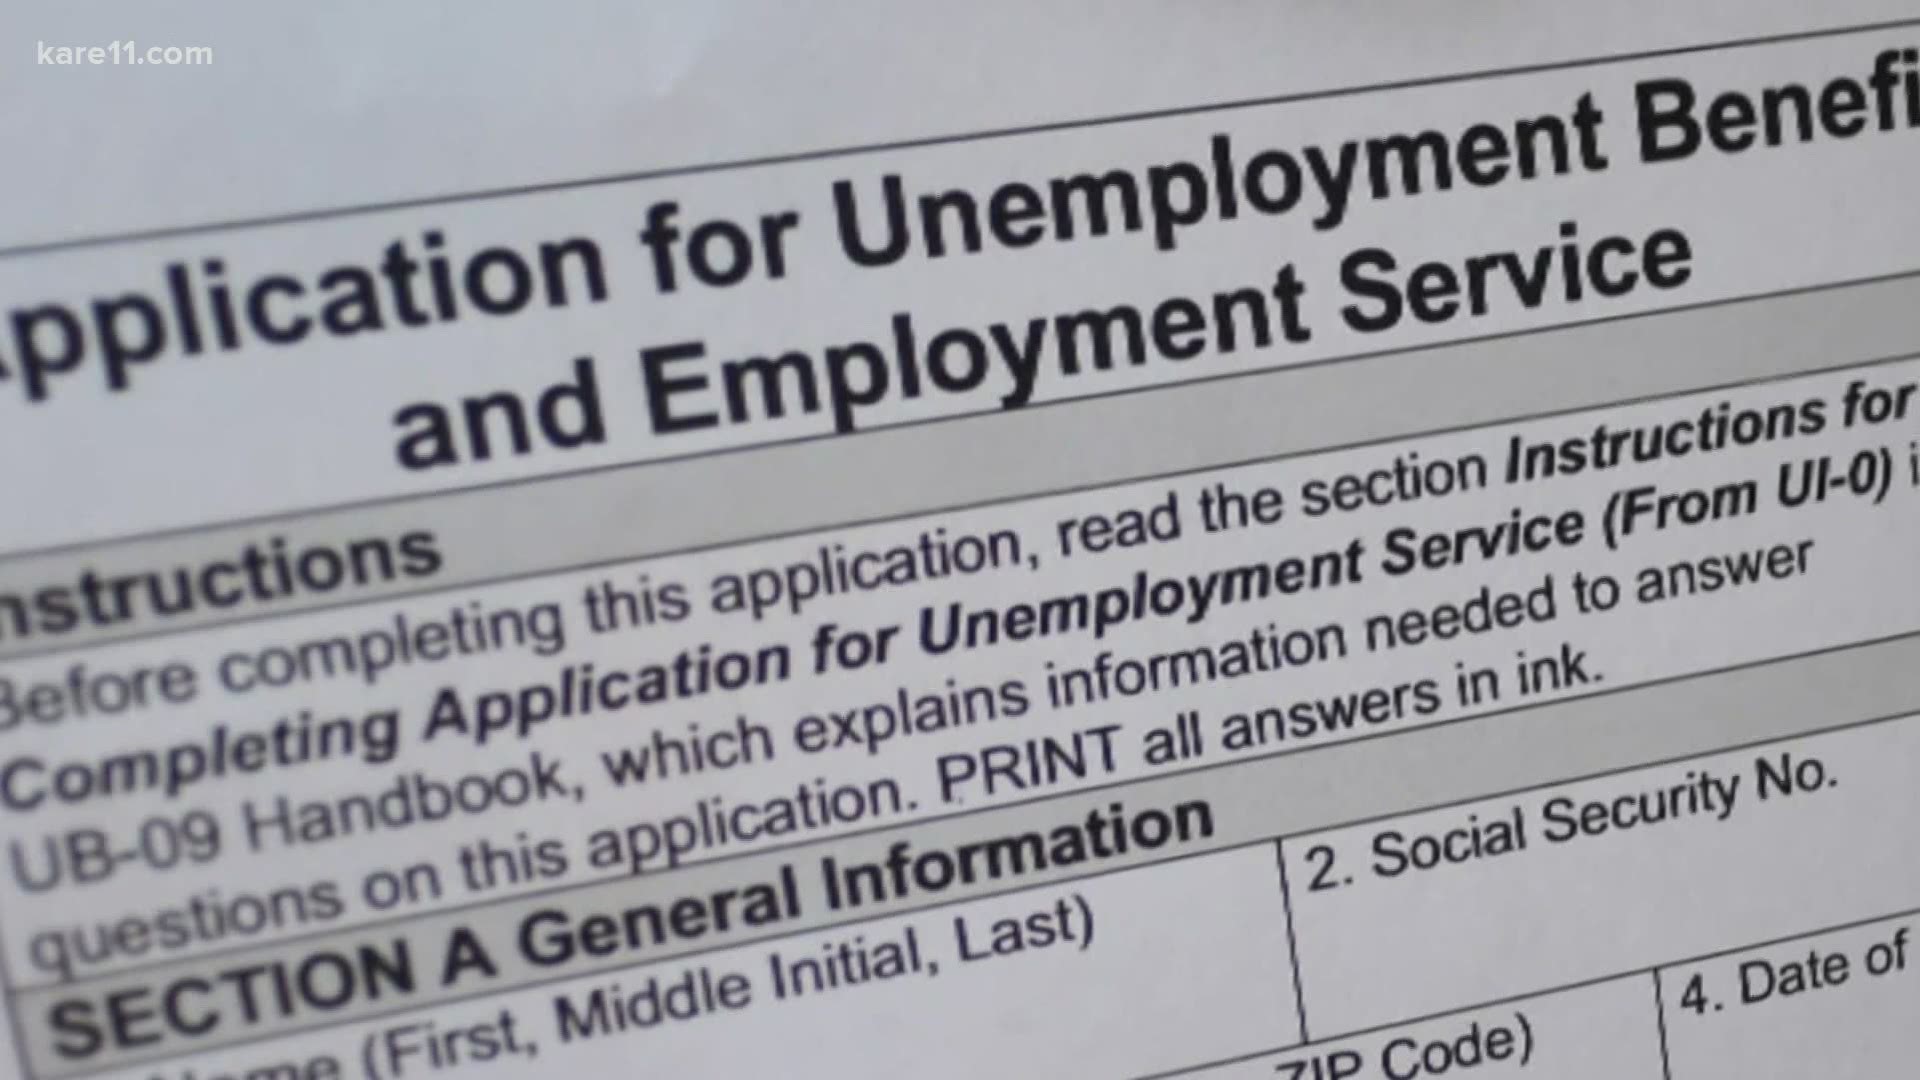 Since March 16, Minnesotans have filed almost a million unemployment applications